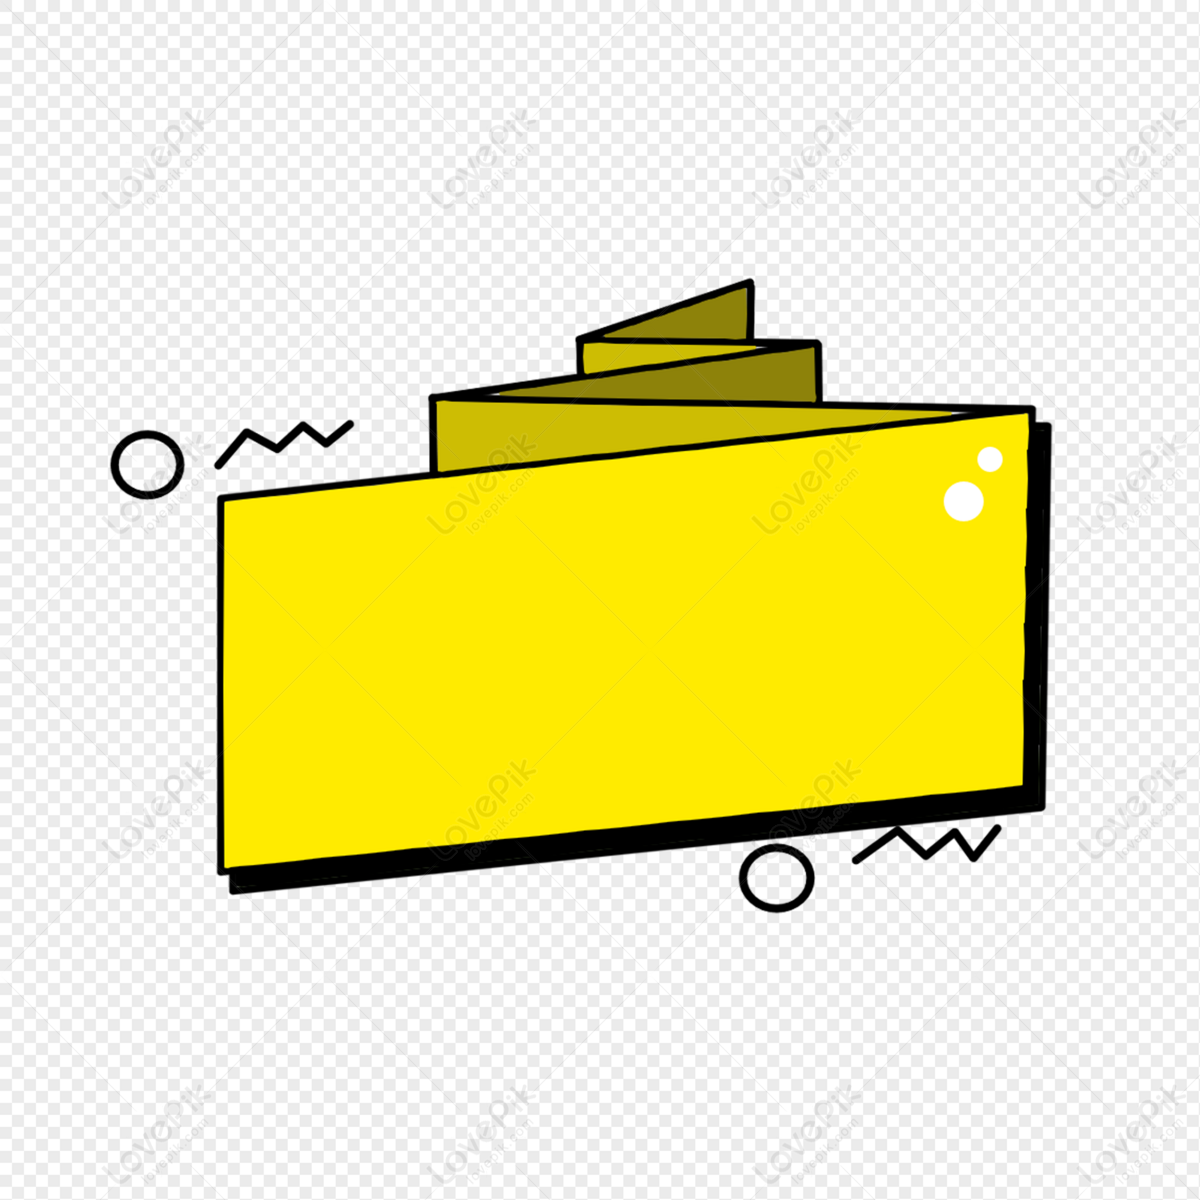 Yellow rectangle label ppt, vector yellow, ppt, yellow border png picture